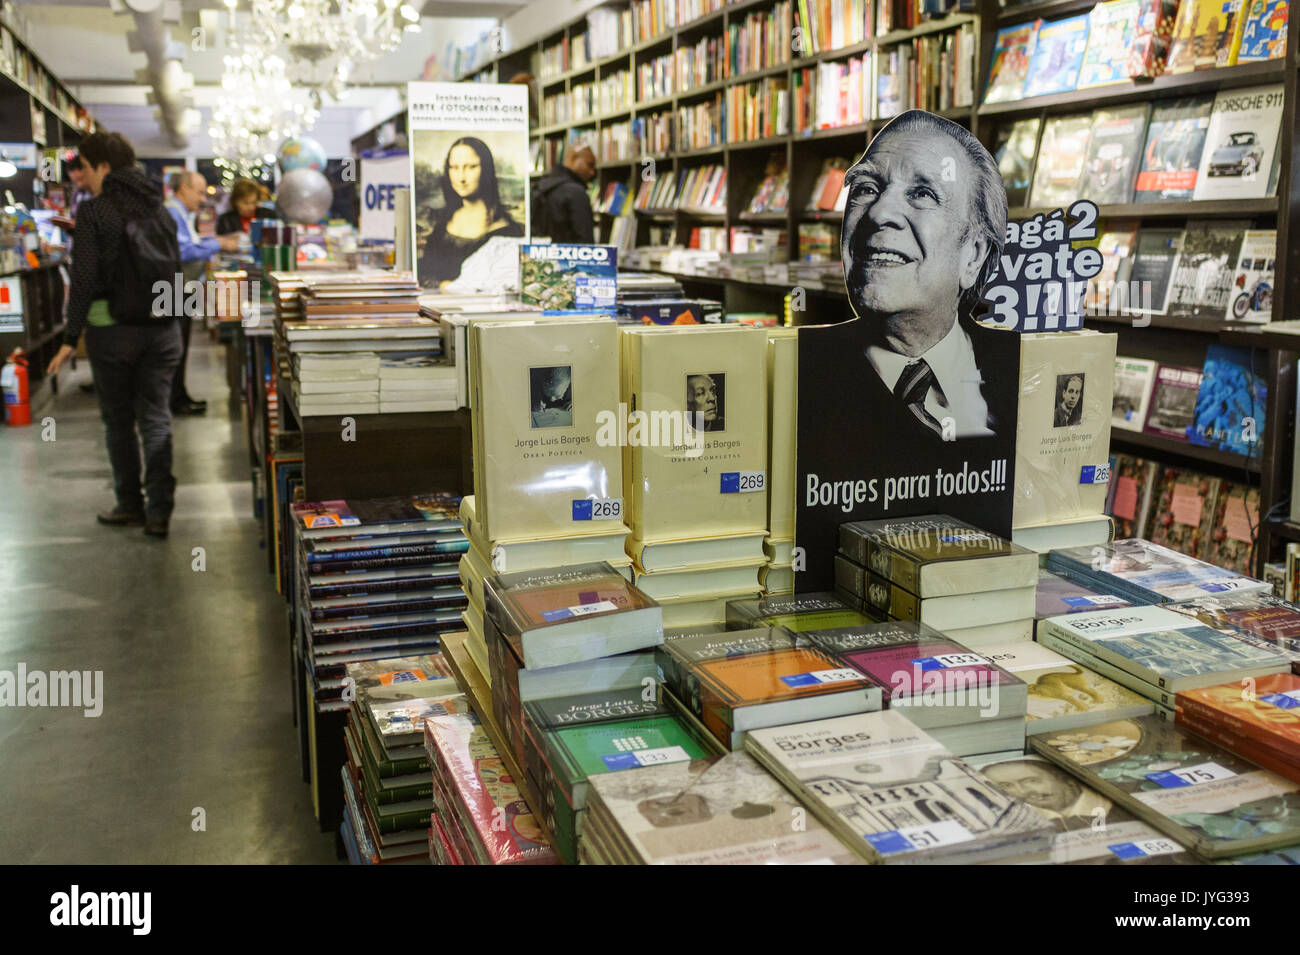 bookshops in Recoleta neighborhood in Buenos Aires offering literature and art books Stock Photo